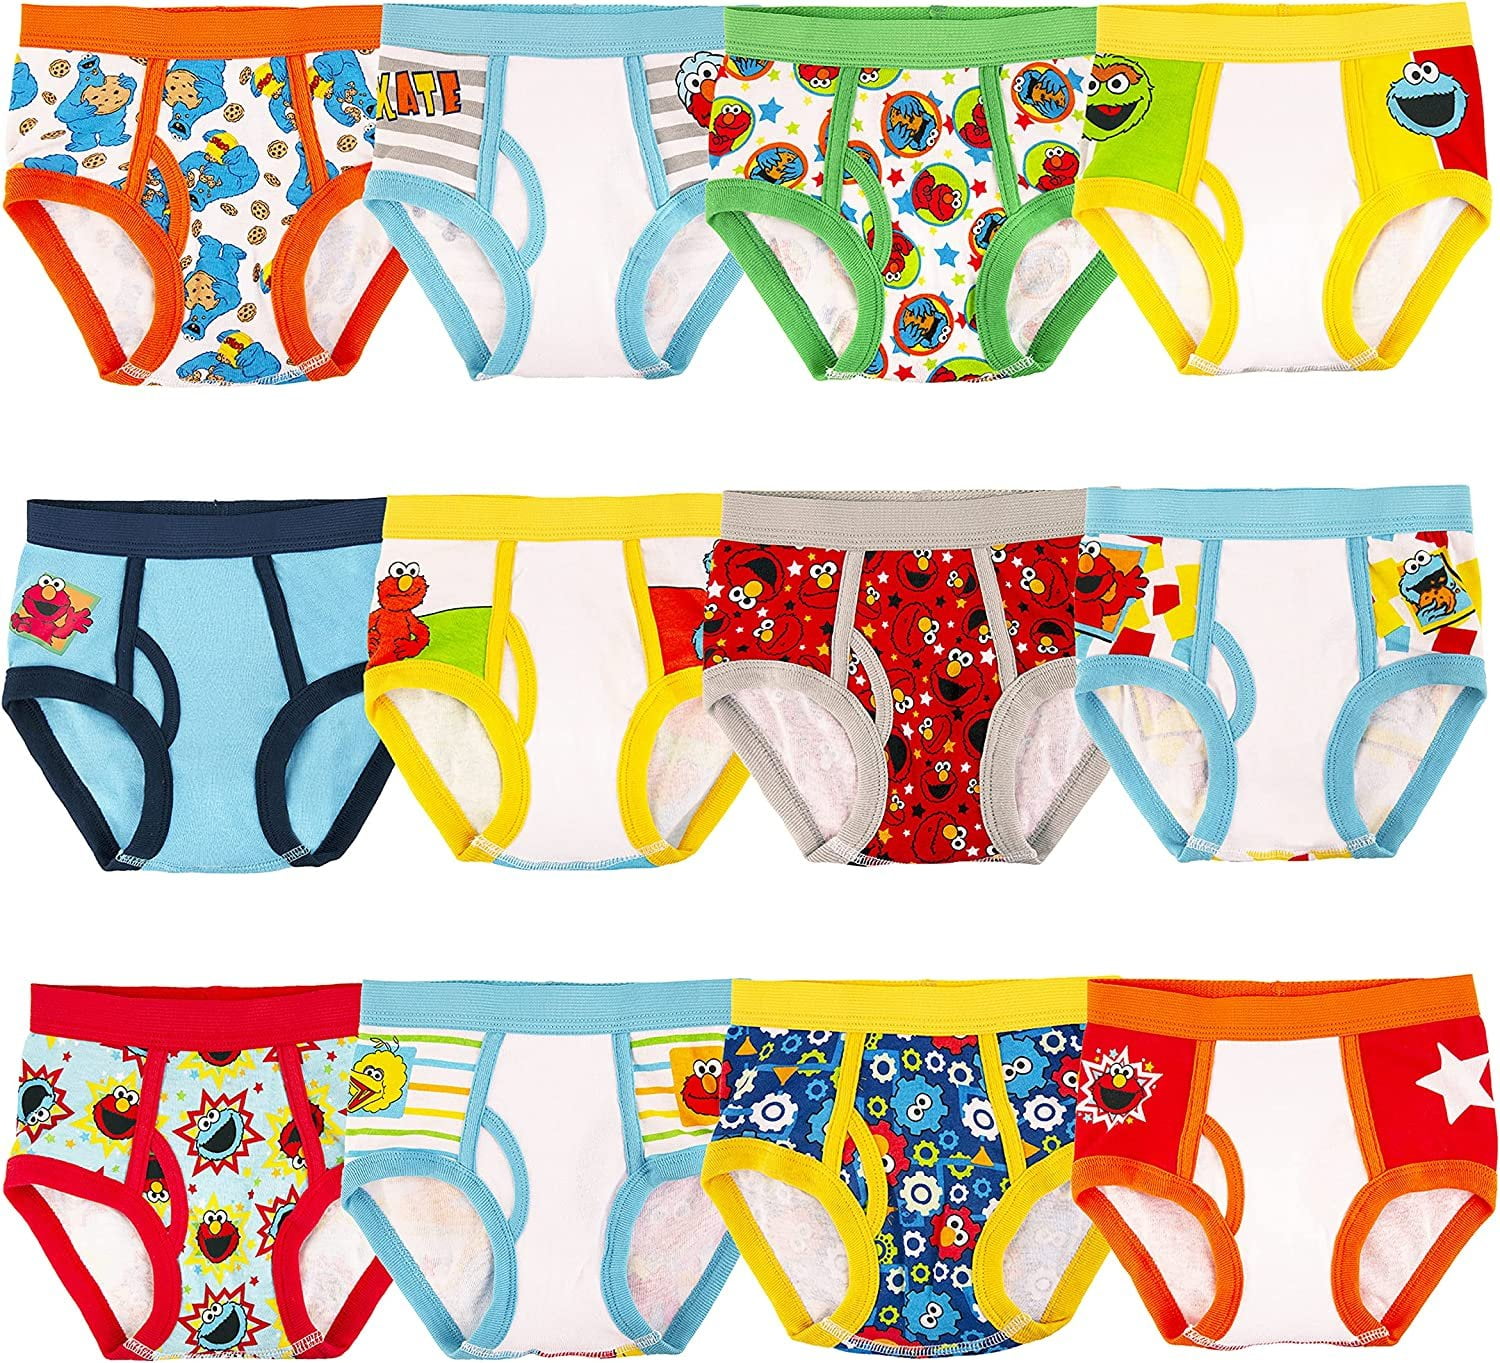  Sesame Street Boys' 12PK Briefs in Advent Box, Elmo, Big Bird &  Cookie Monster Make Potty Training Fun with Stickers & Chart, 12-Pack, 18M:  Clothing, Shoes & Jewelry